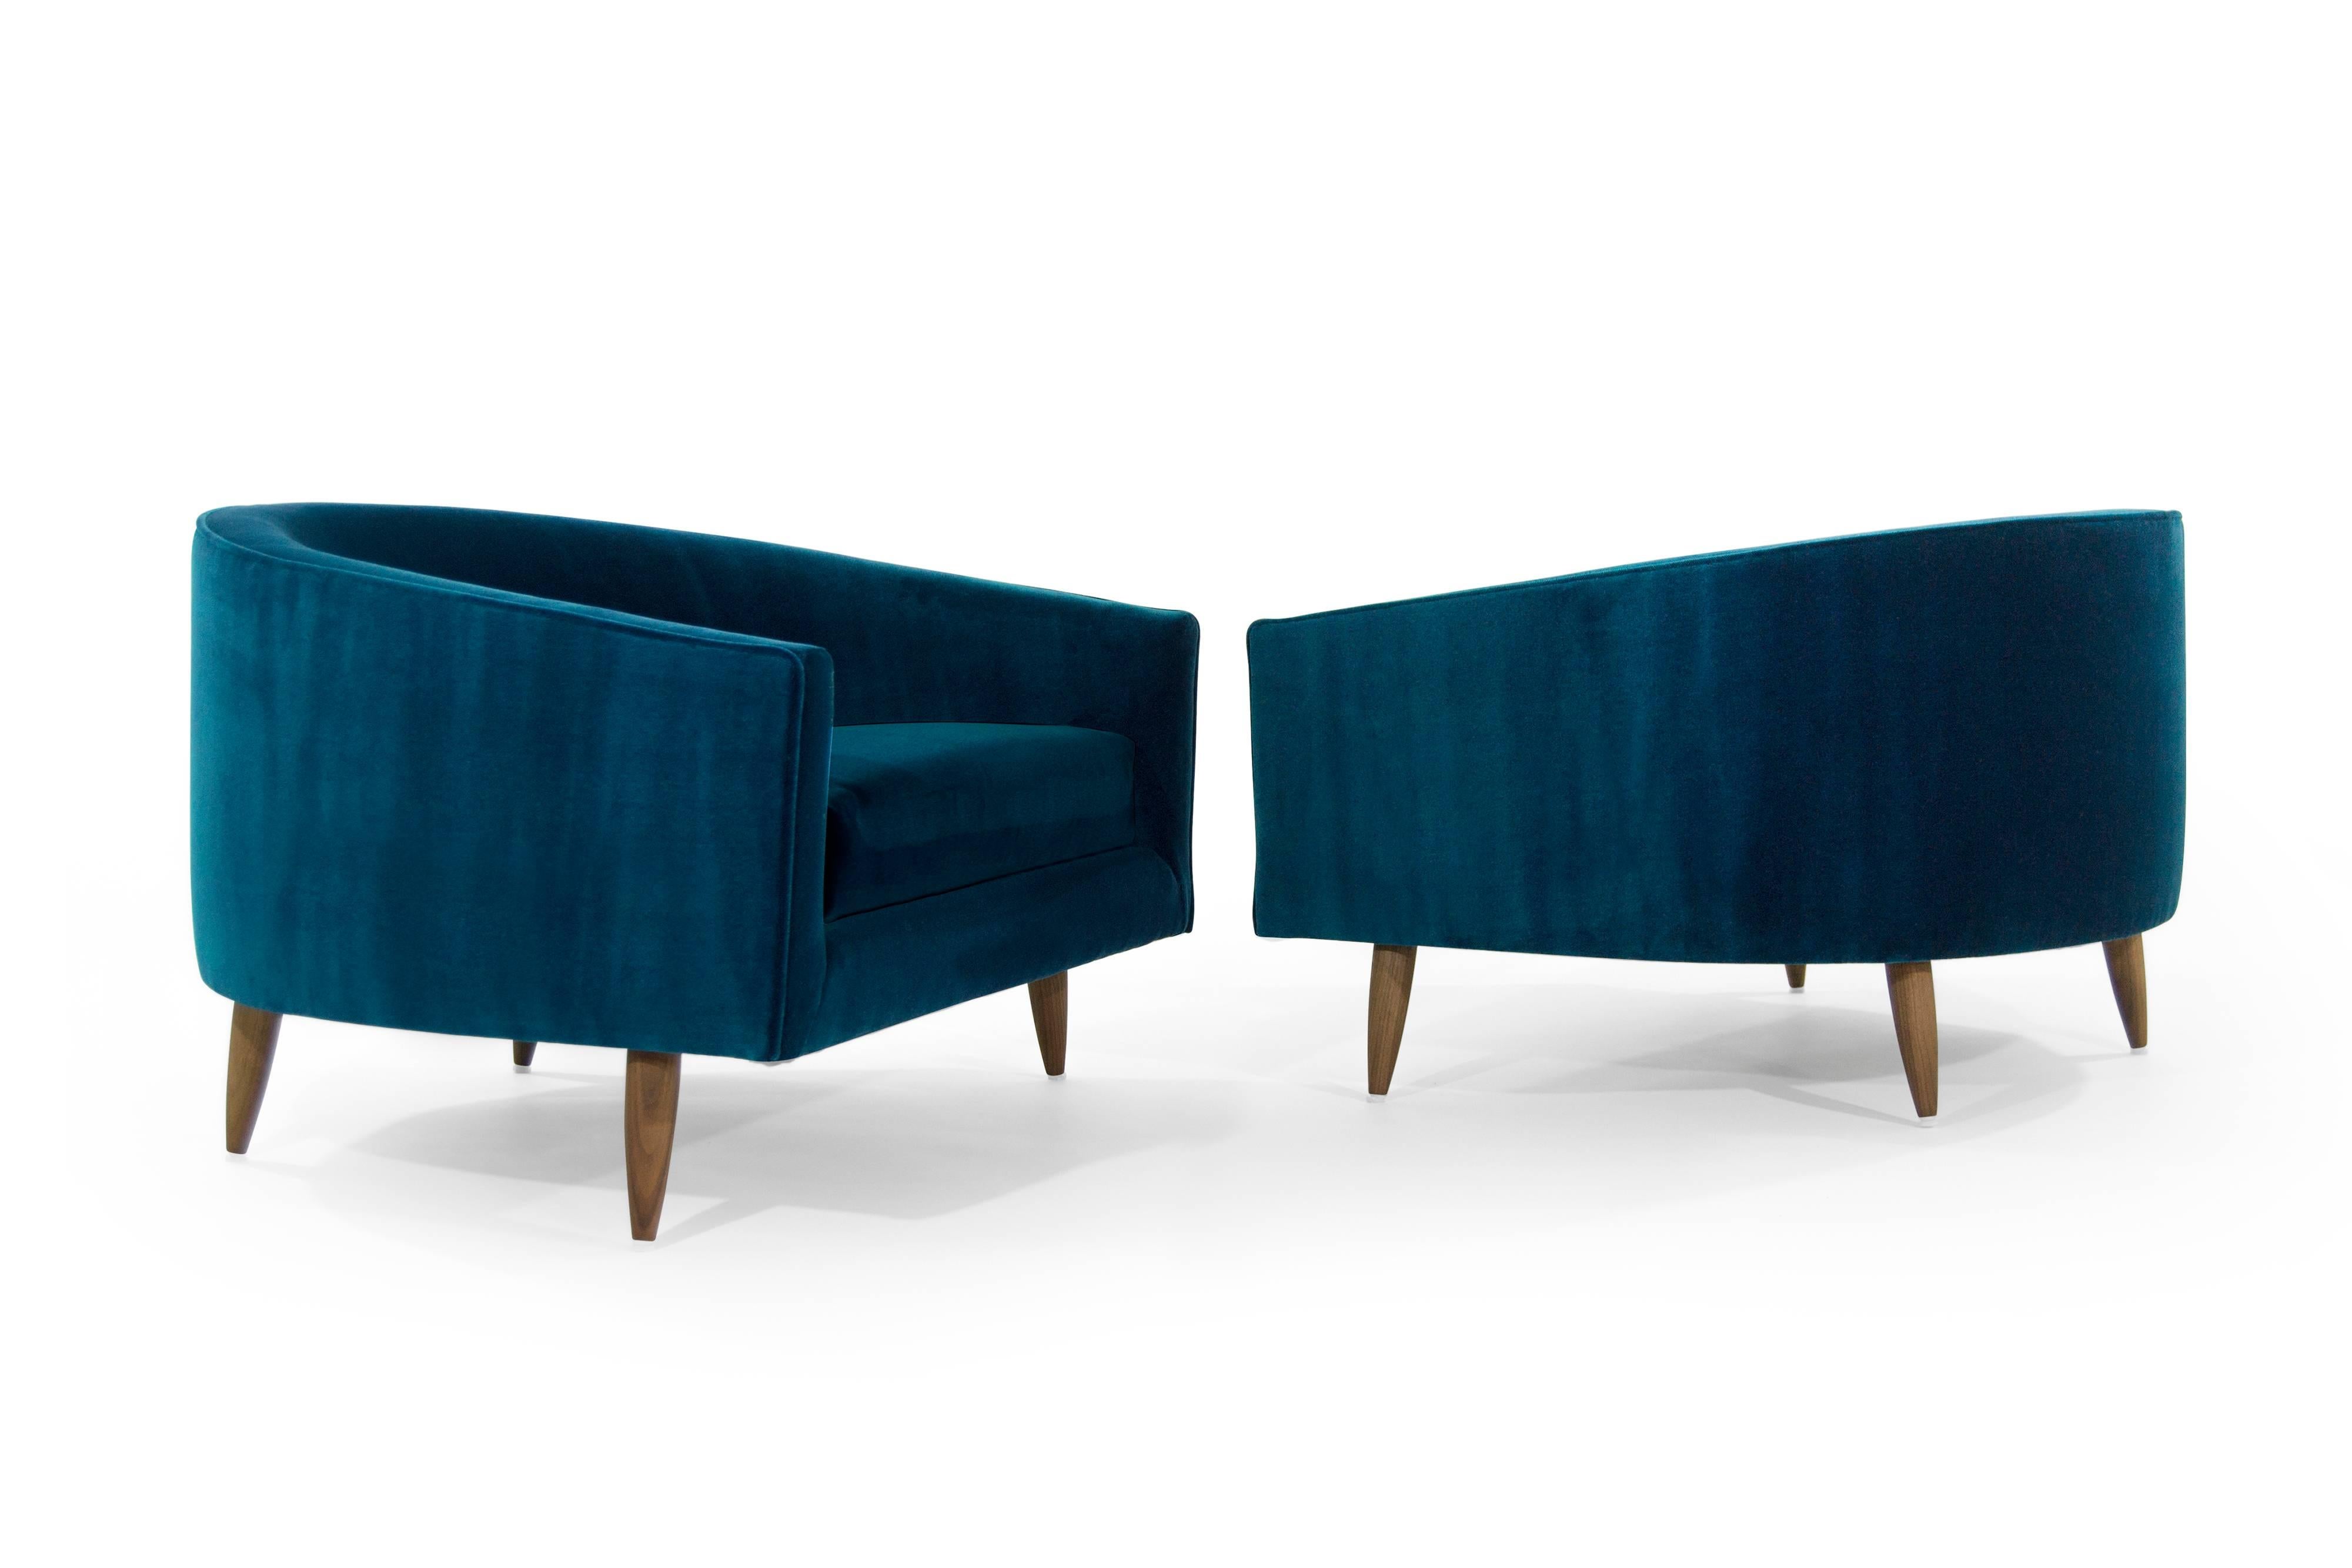 Rare pair of low and wide profile, lounge chairs designed by Adrian Pearsall for Craft Associates. Extremely comfortable! Perhaps one of Adrian's best designs.

Newly upholstered in aqua plush velvet by Holly Hunt. Walnut legs fully restored.
 